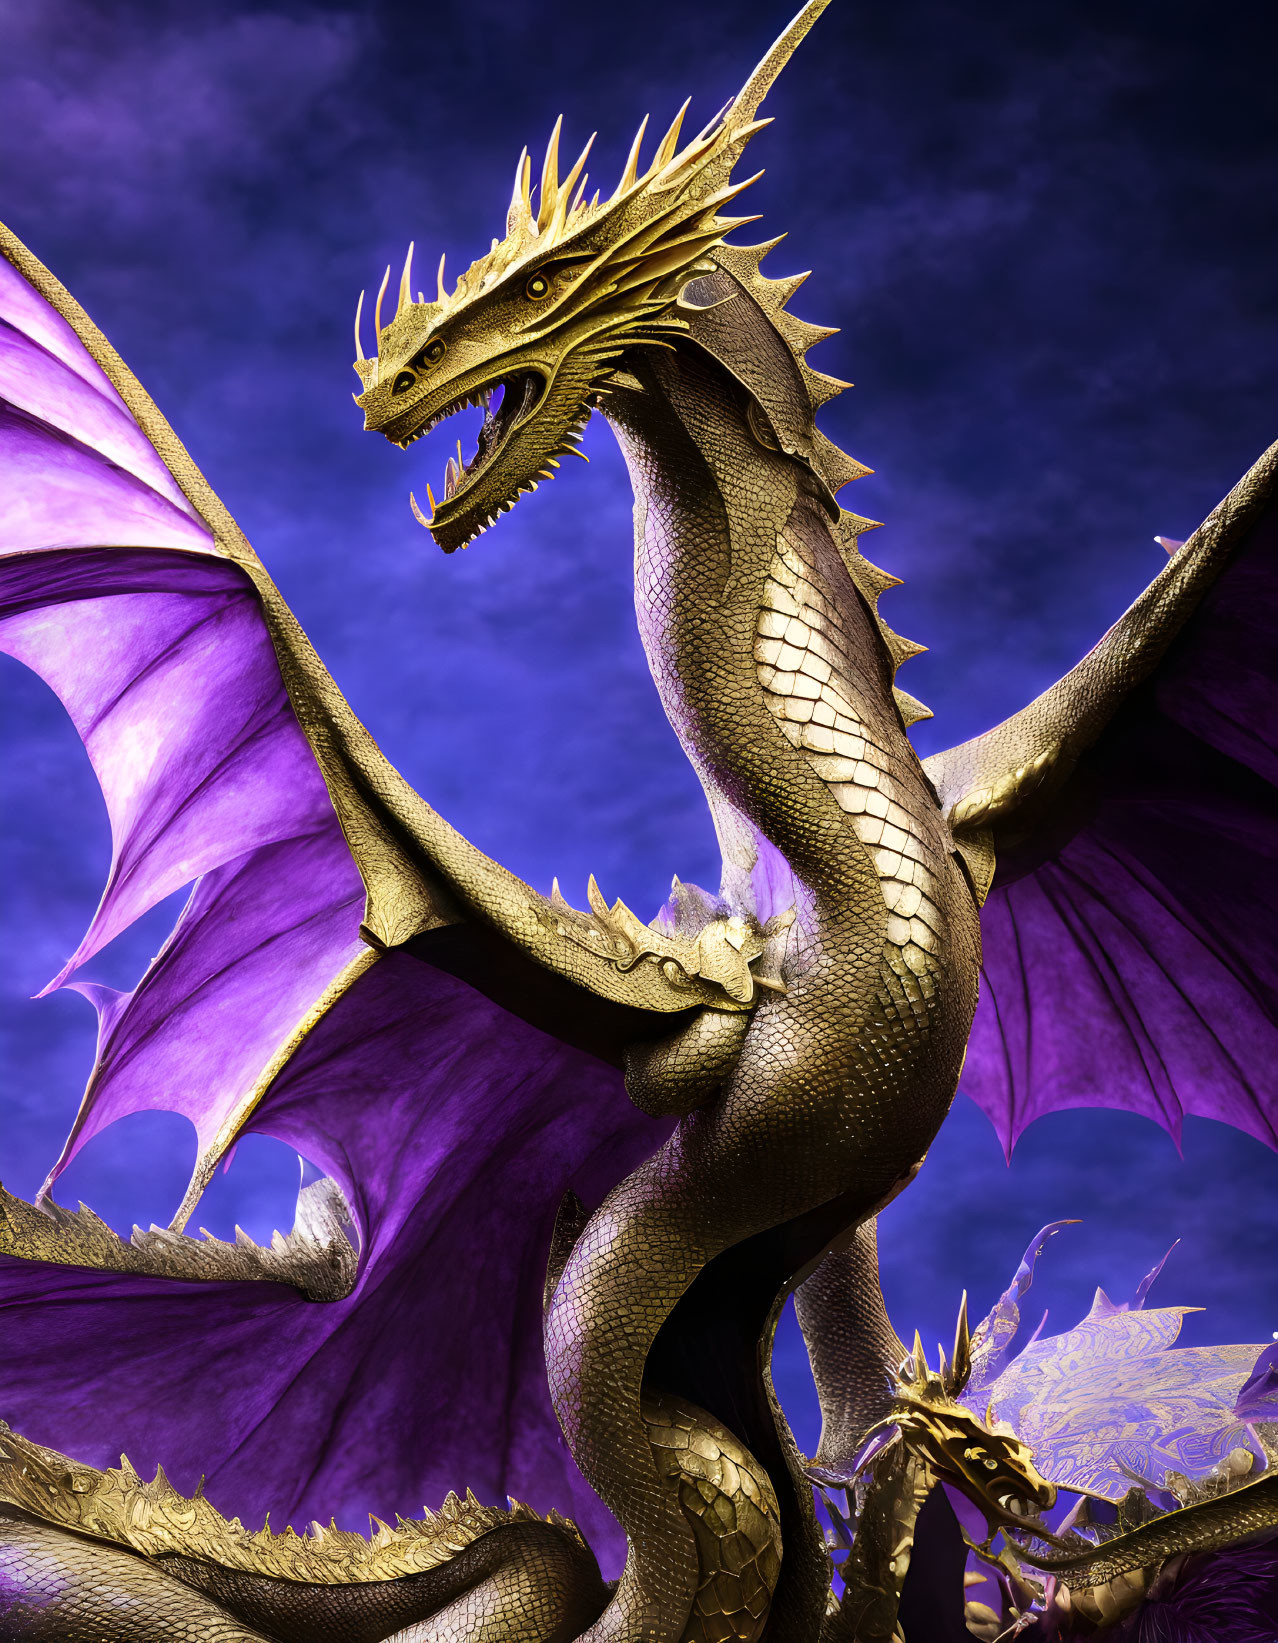 Golden dragon with purple wings in blue sky